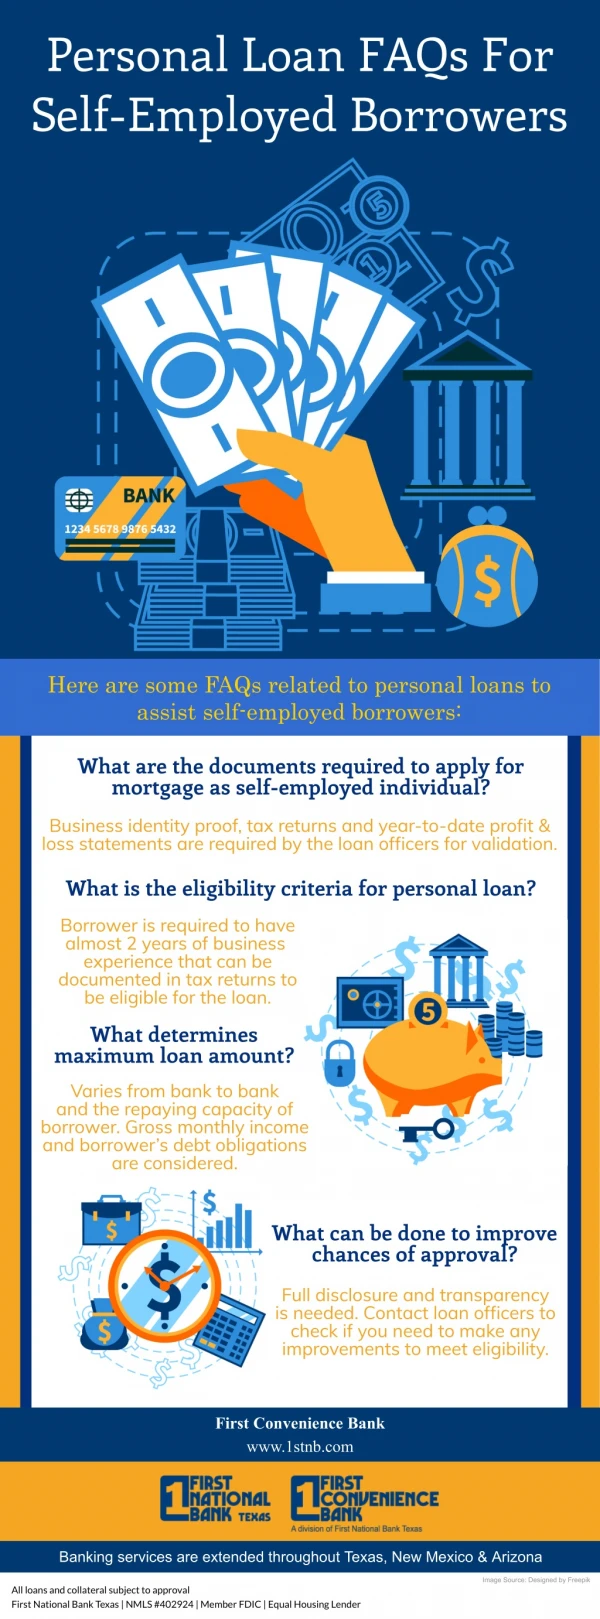 Personal Loan FAQs For Self-Employed Borrowers